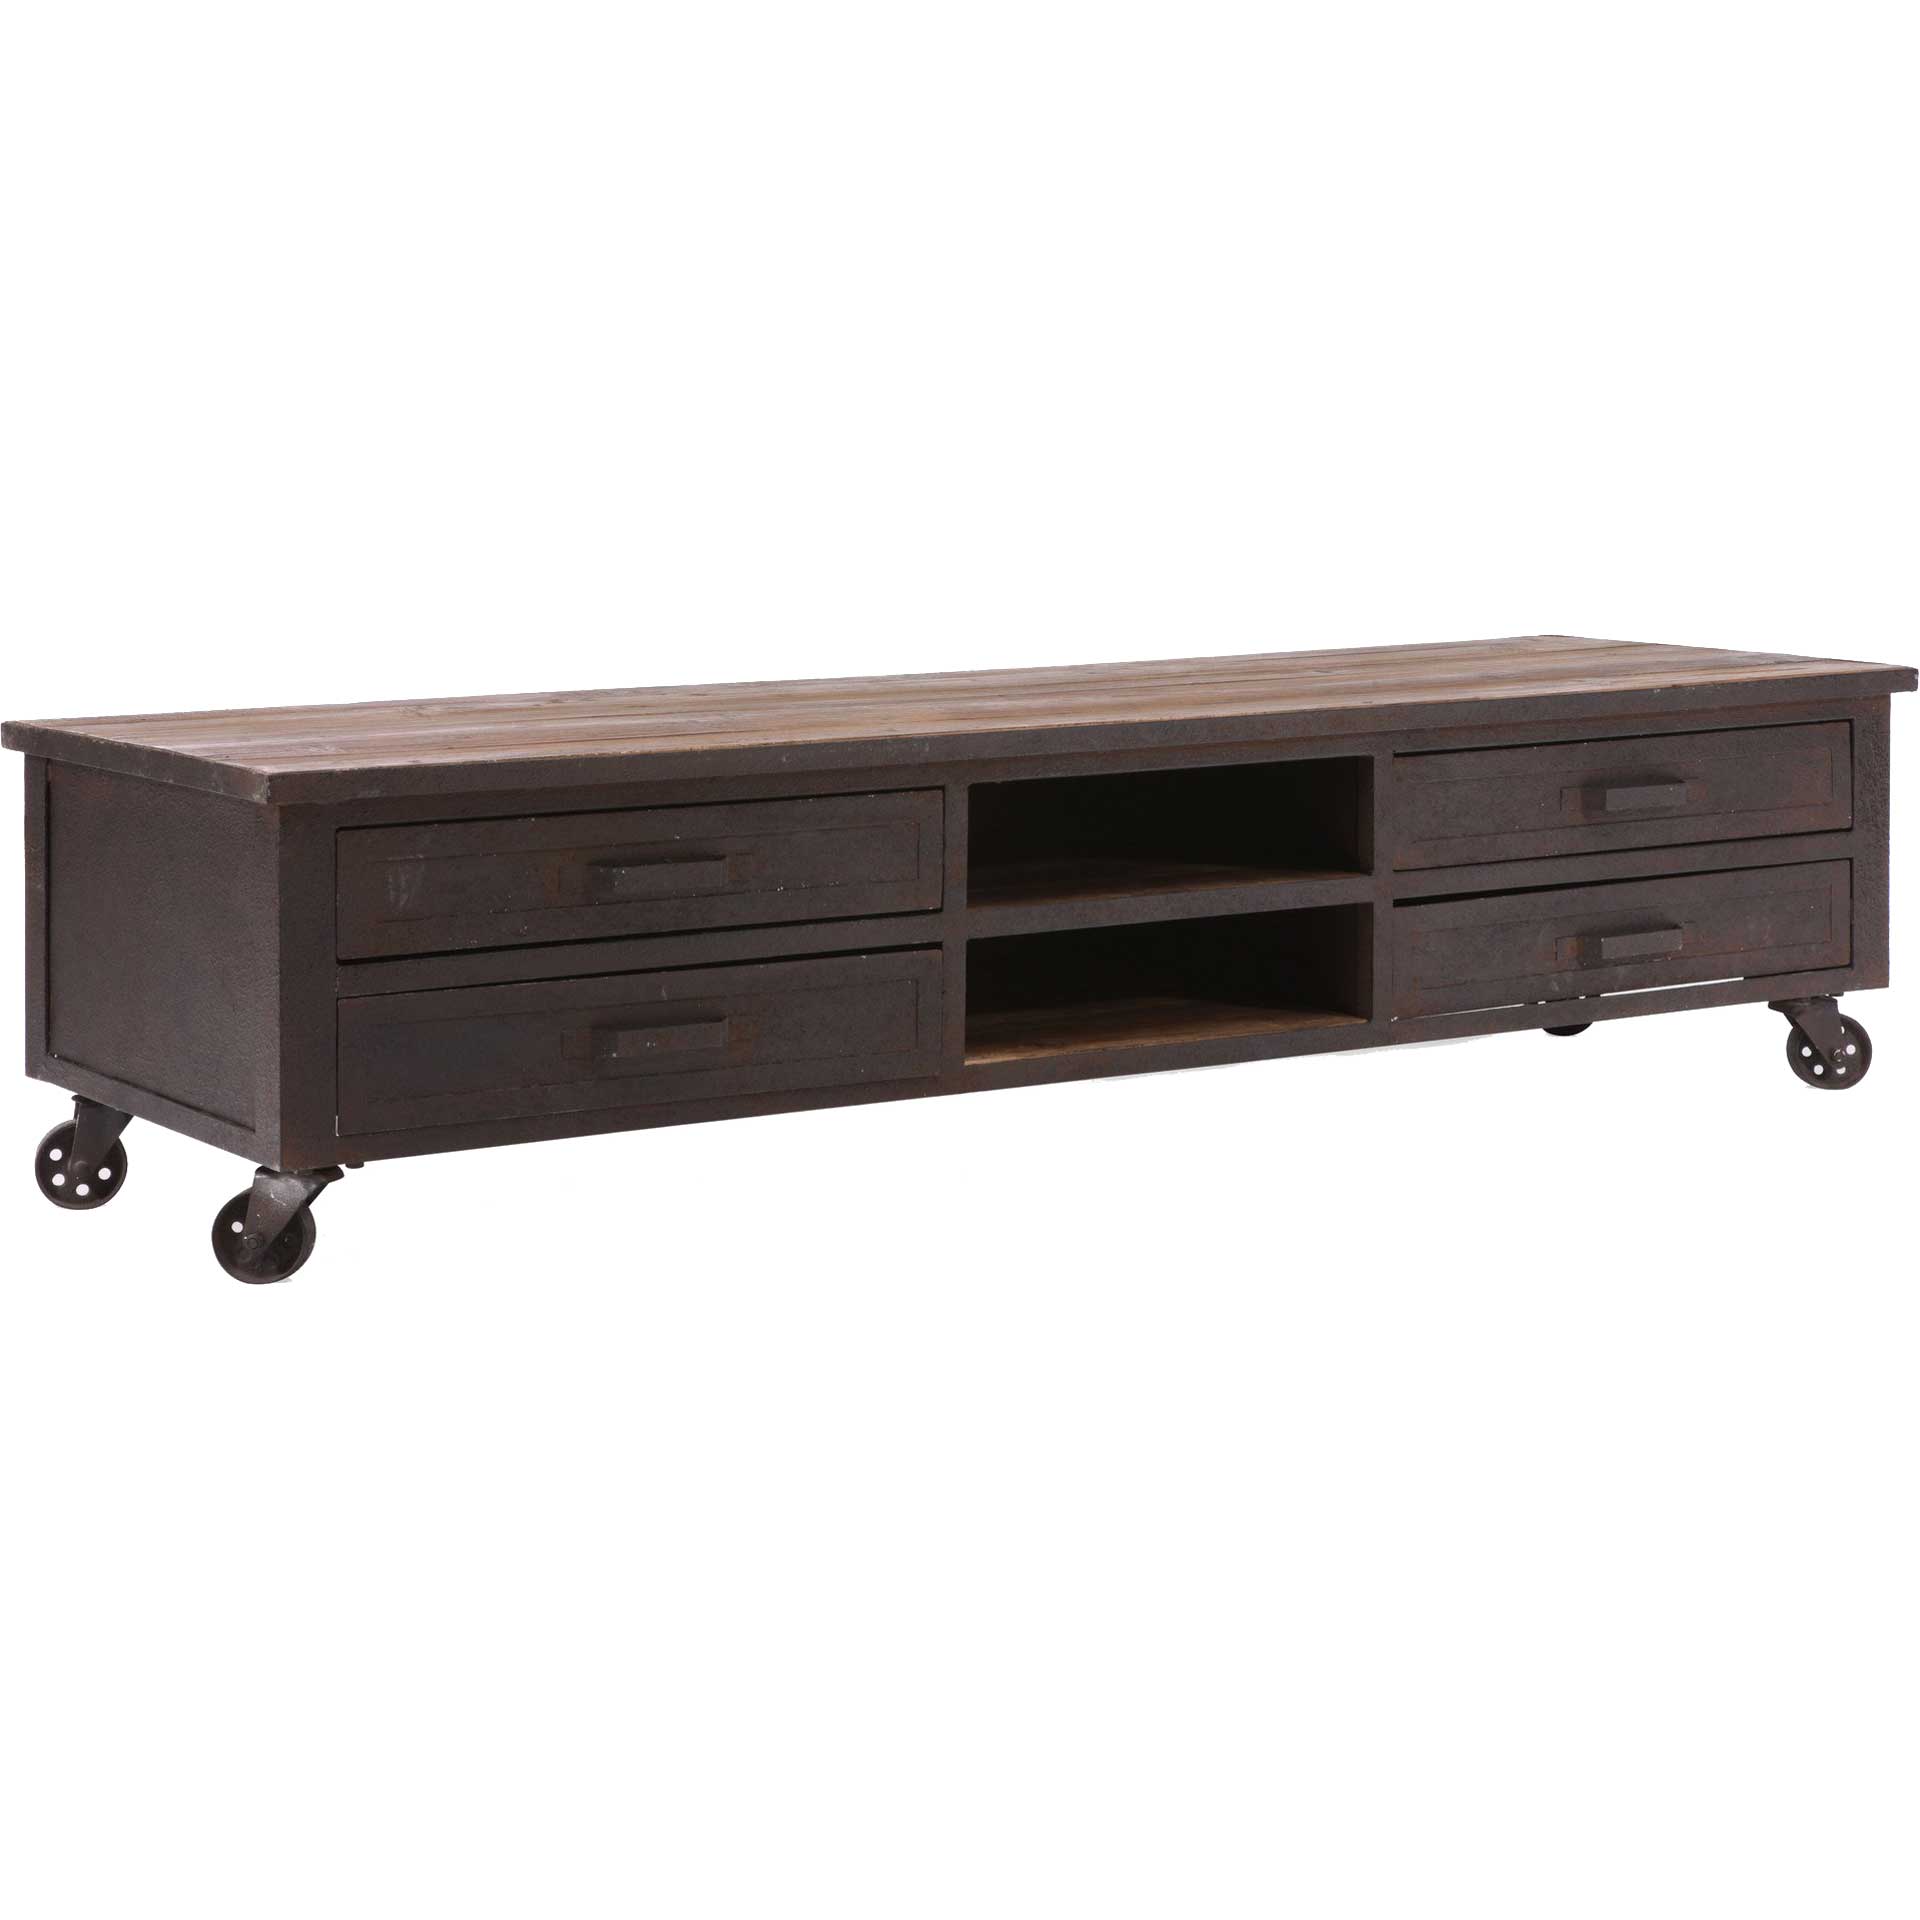 Franklin Entertainment Stand Distressed Natural